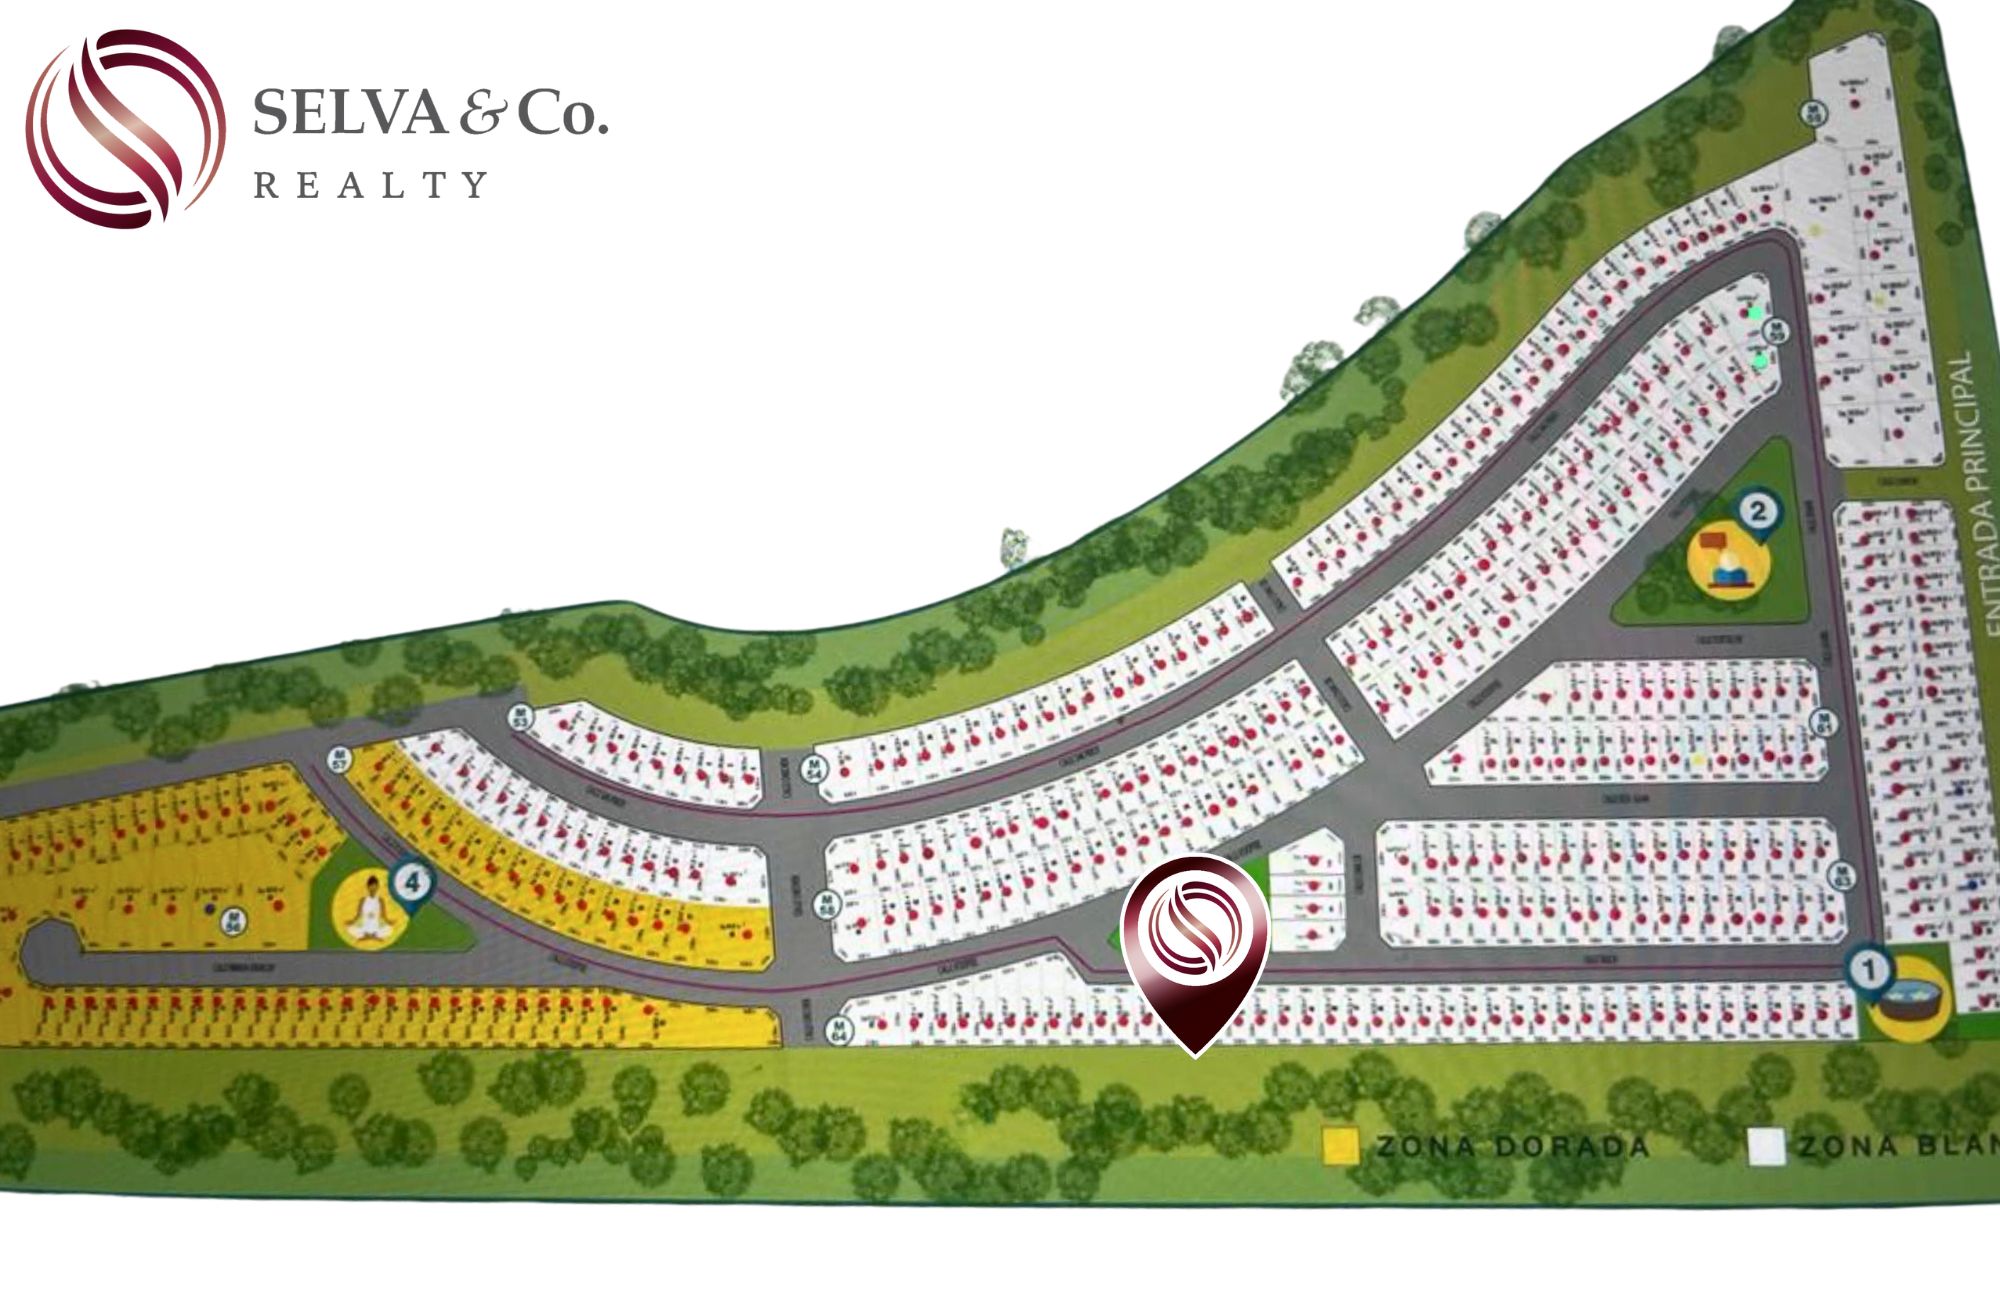 Residential lot in gated community with amenities, protected green areas, commercial area, near the beach and hotel zone.